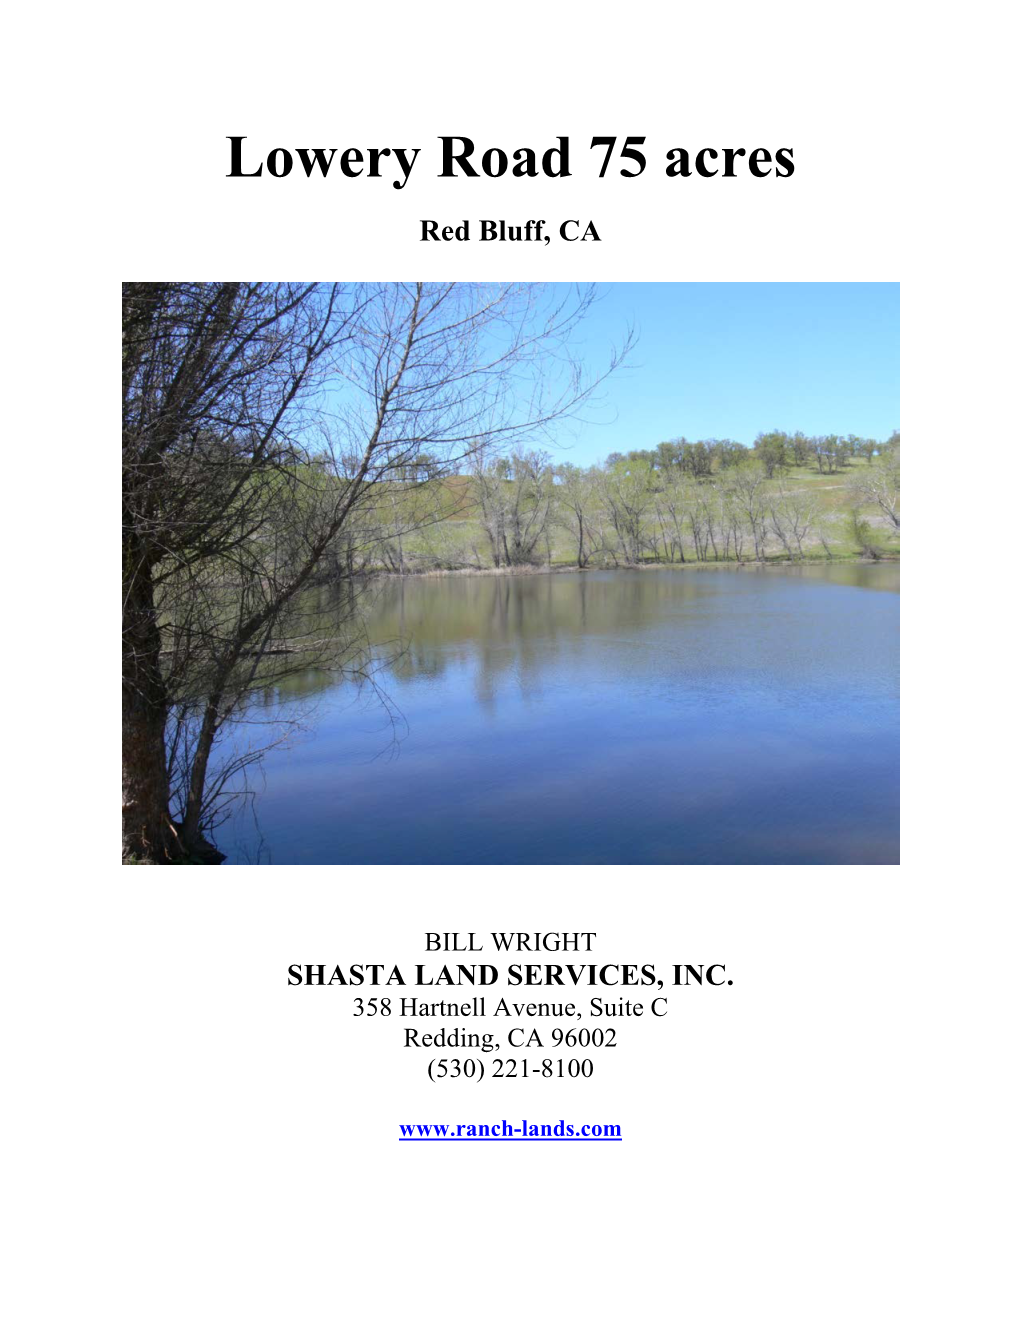 Lowery Road 75 Acres Red Bluff, CA